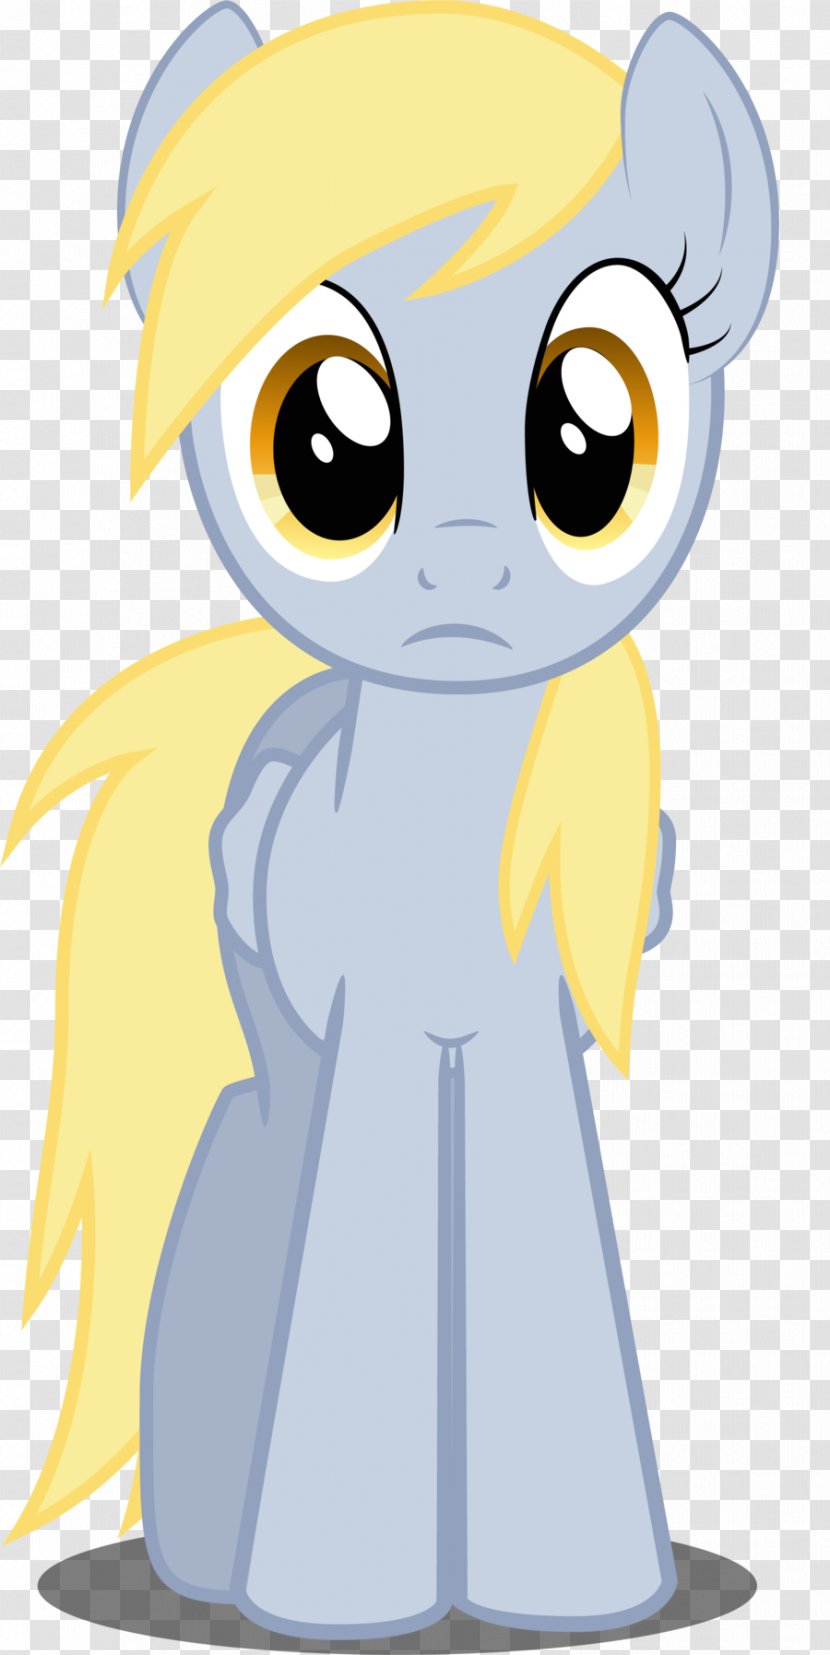 Derpy Hooves Rainbow Dash Pony Pinkie Pie Twilight Sparkle - Scp Foundation - Obscured Child Transparent PNG